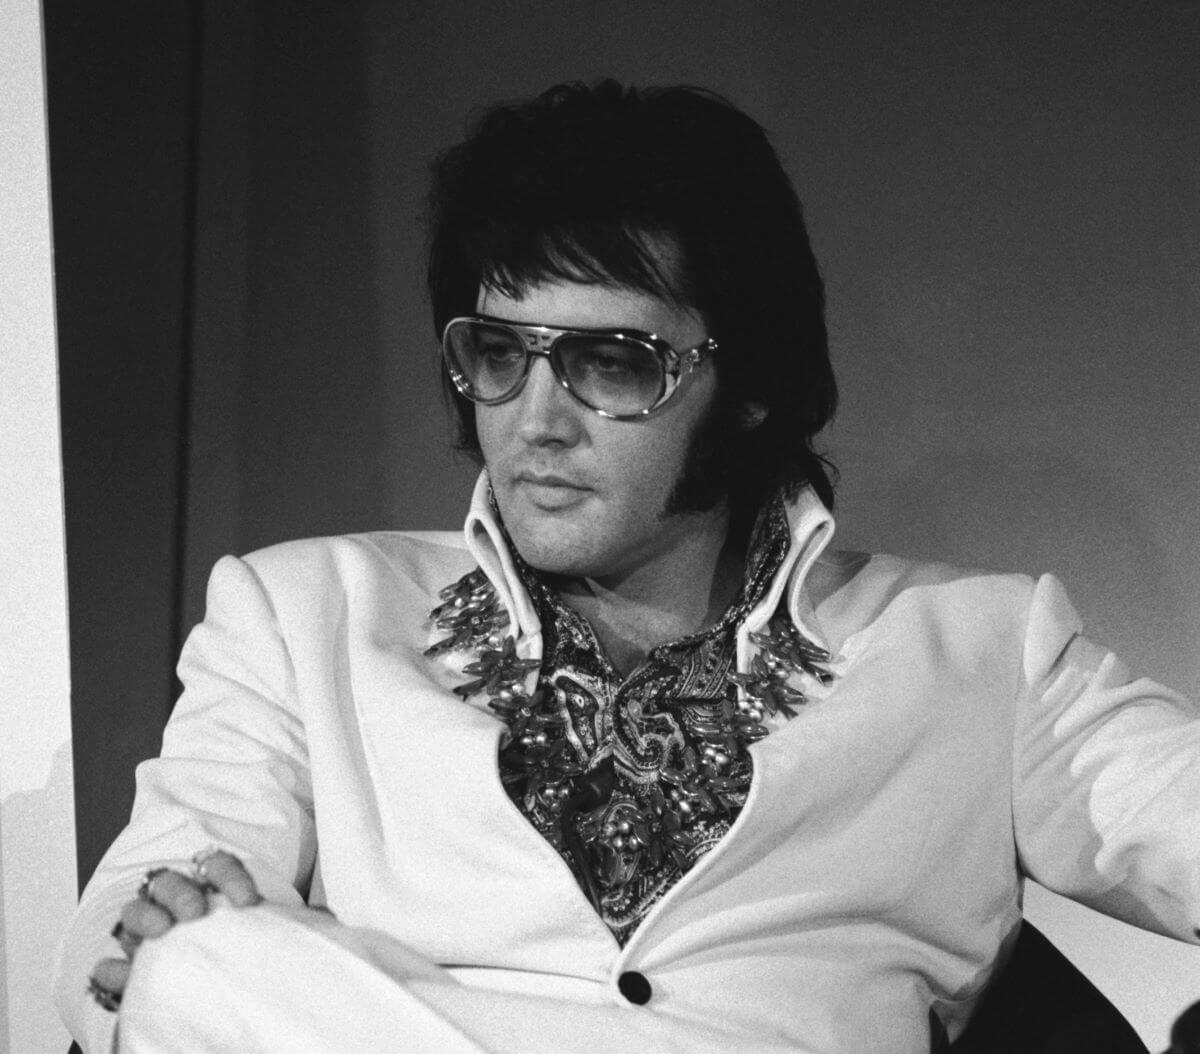 A black and white picture of Elvis Presley wearing a jumpsuit and sunglasses. He sits and rests one hand on his knee.